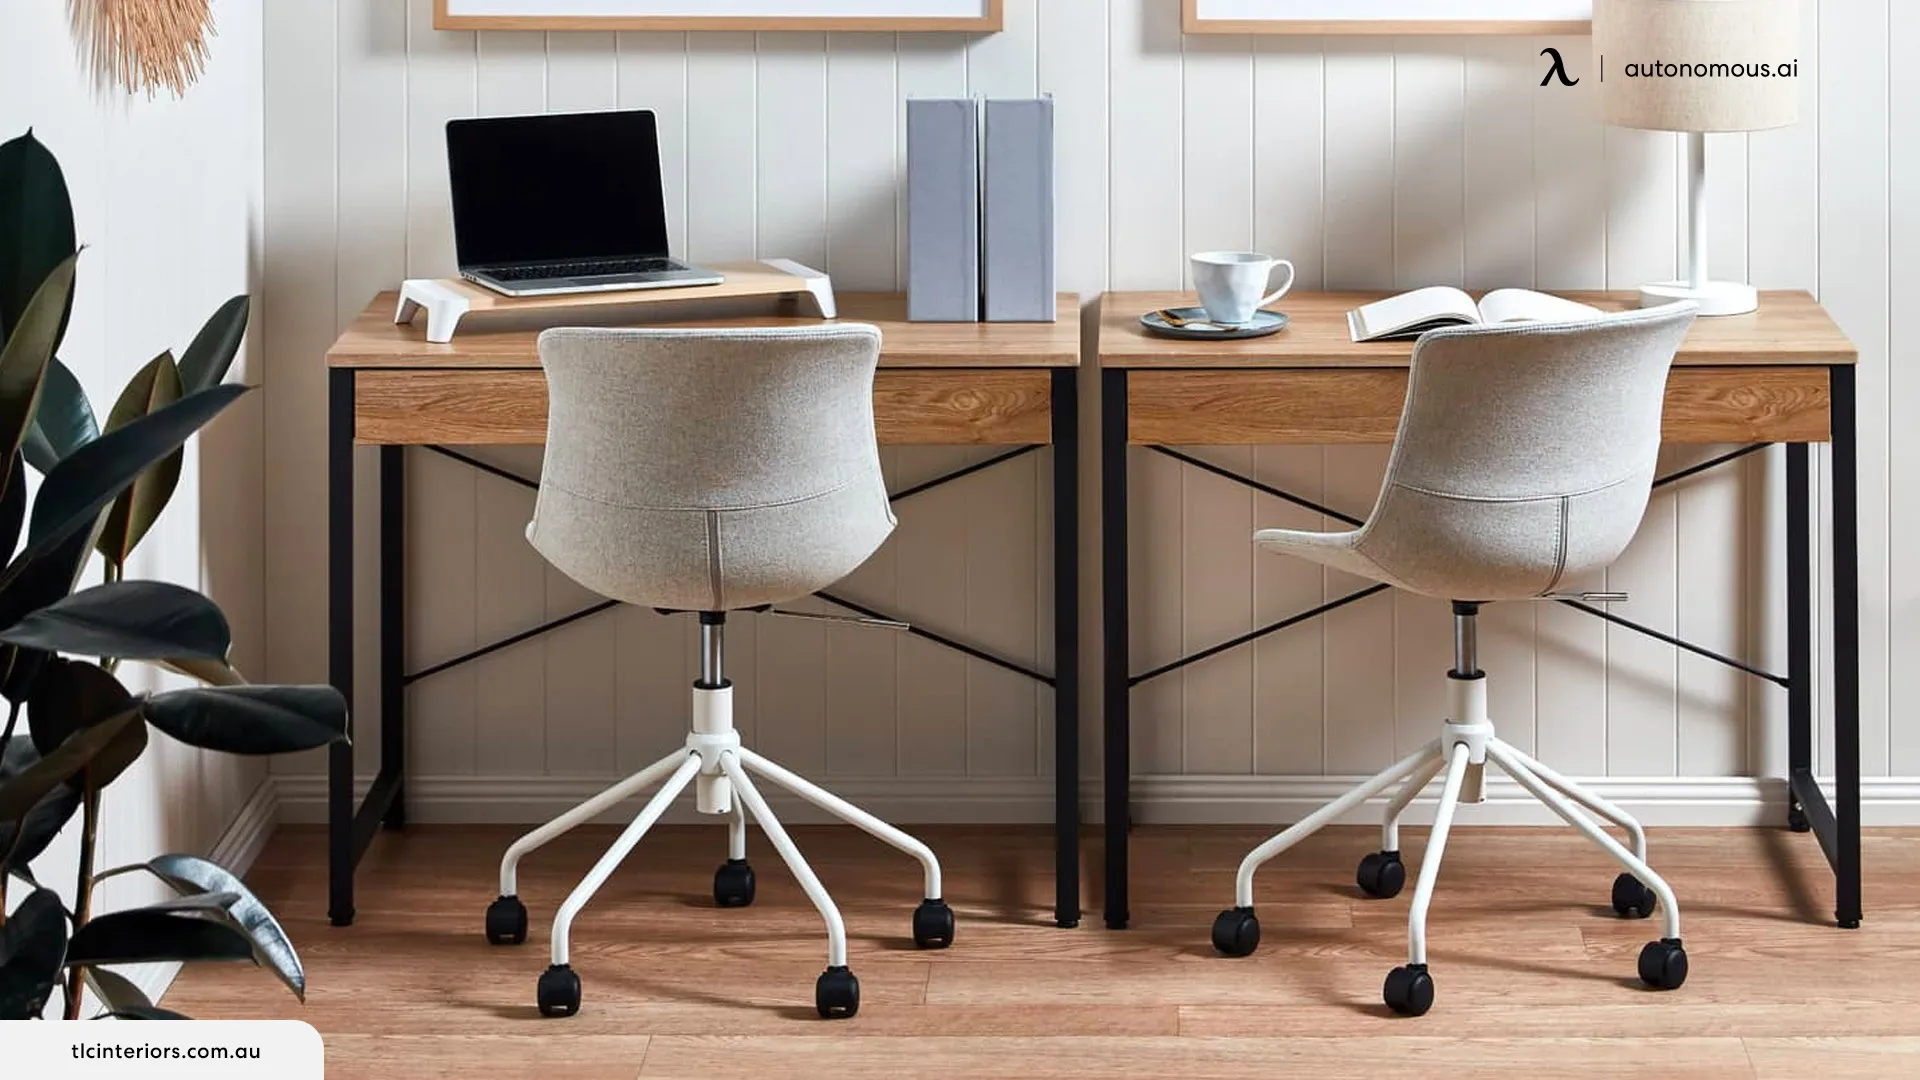 The 10 Best Upholstered Office Chairs With Wheels - 2023 Reviews